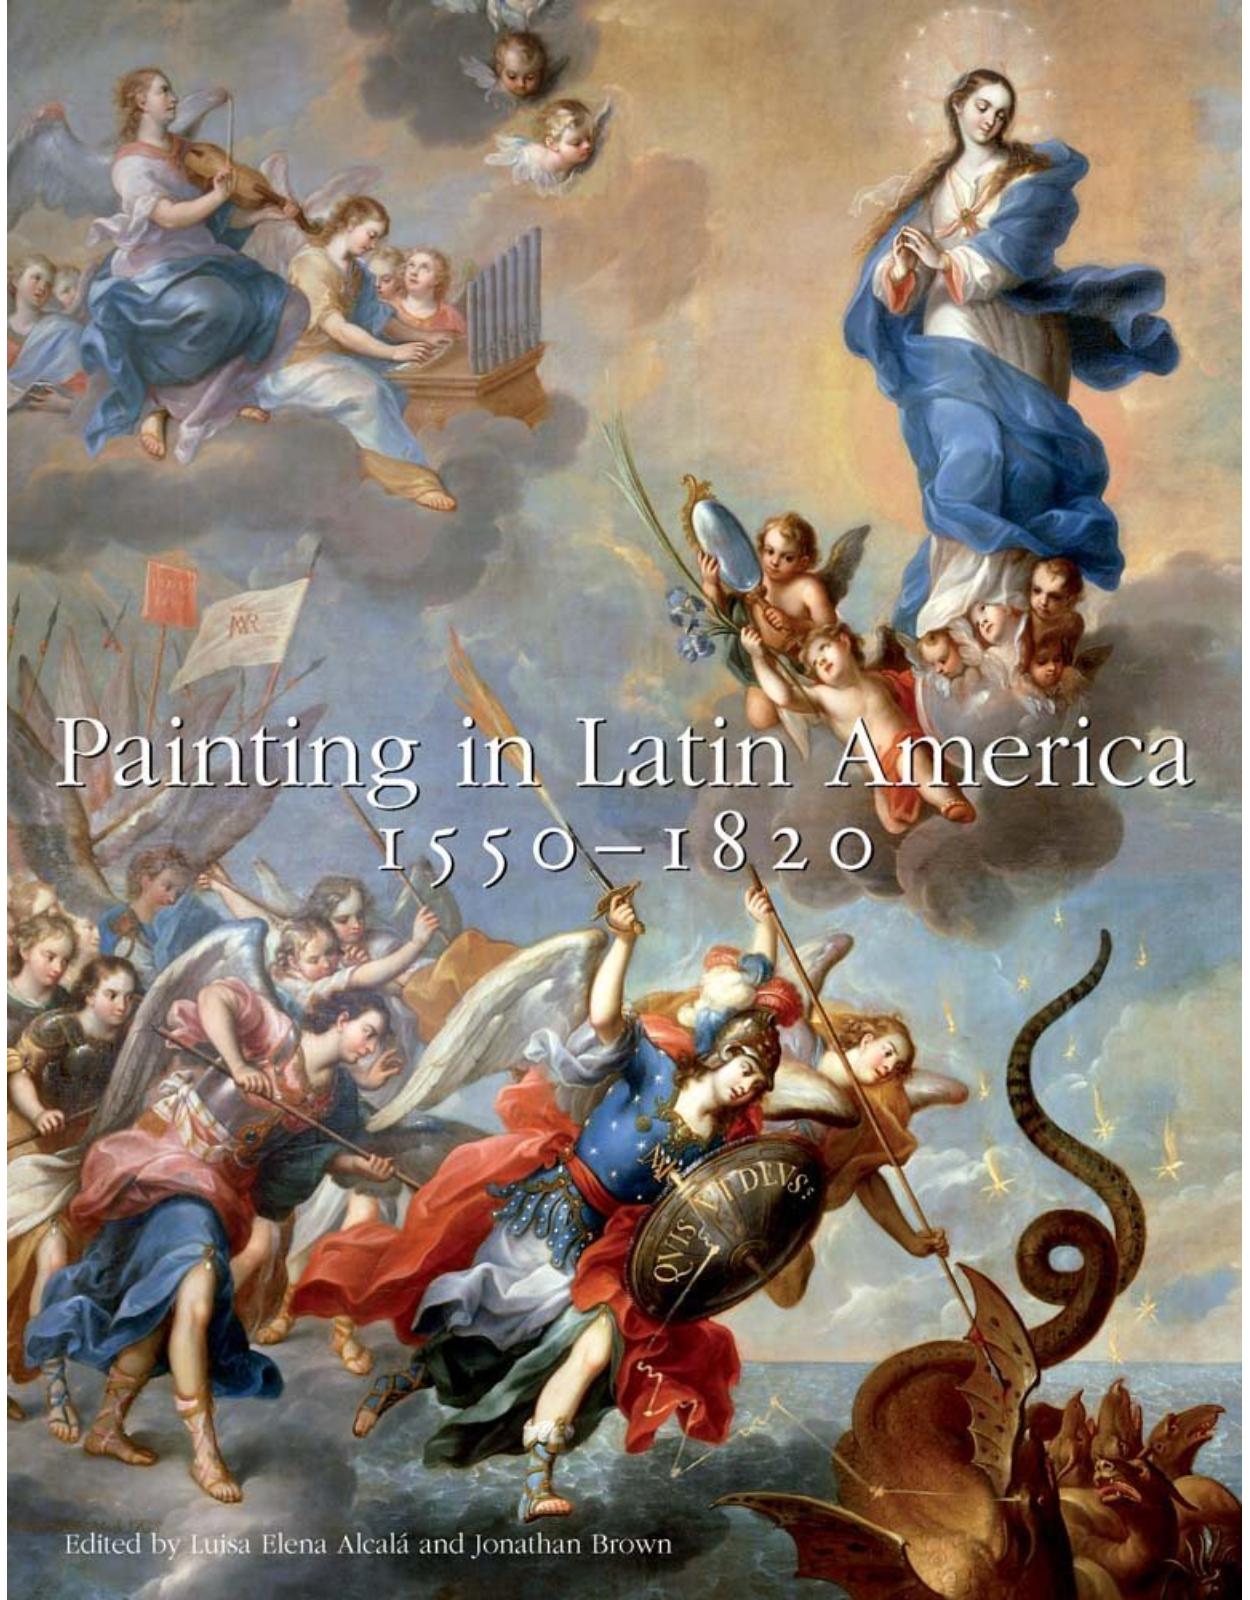 Painting in Latin America, 1550-1820. From Conquest to Independence